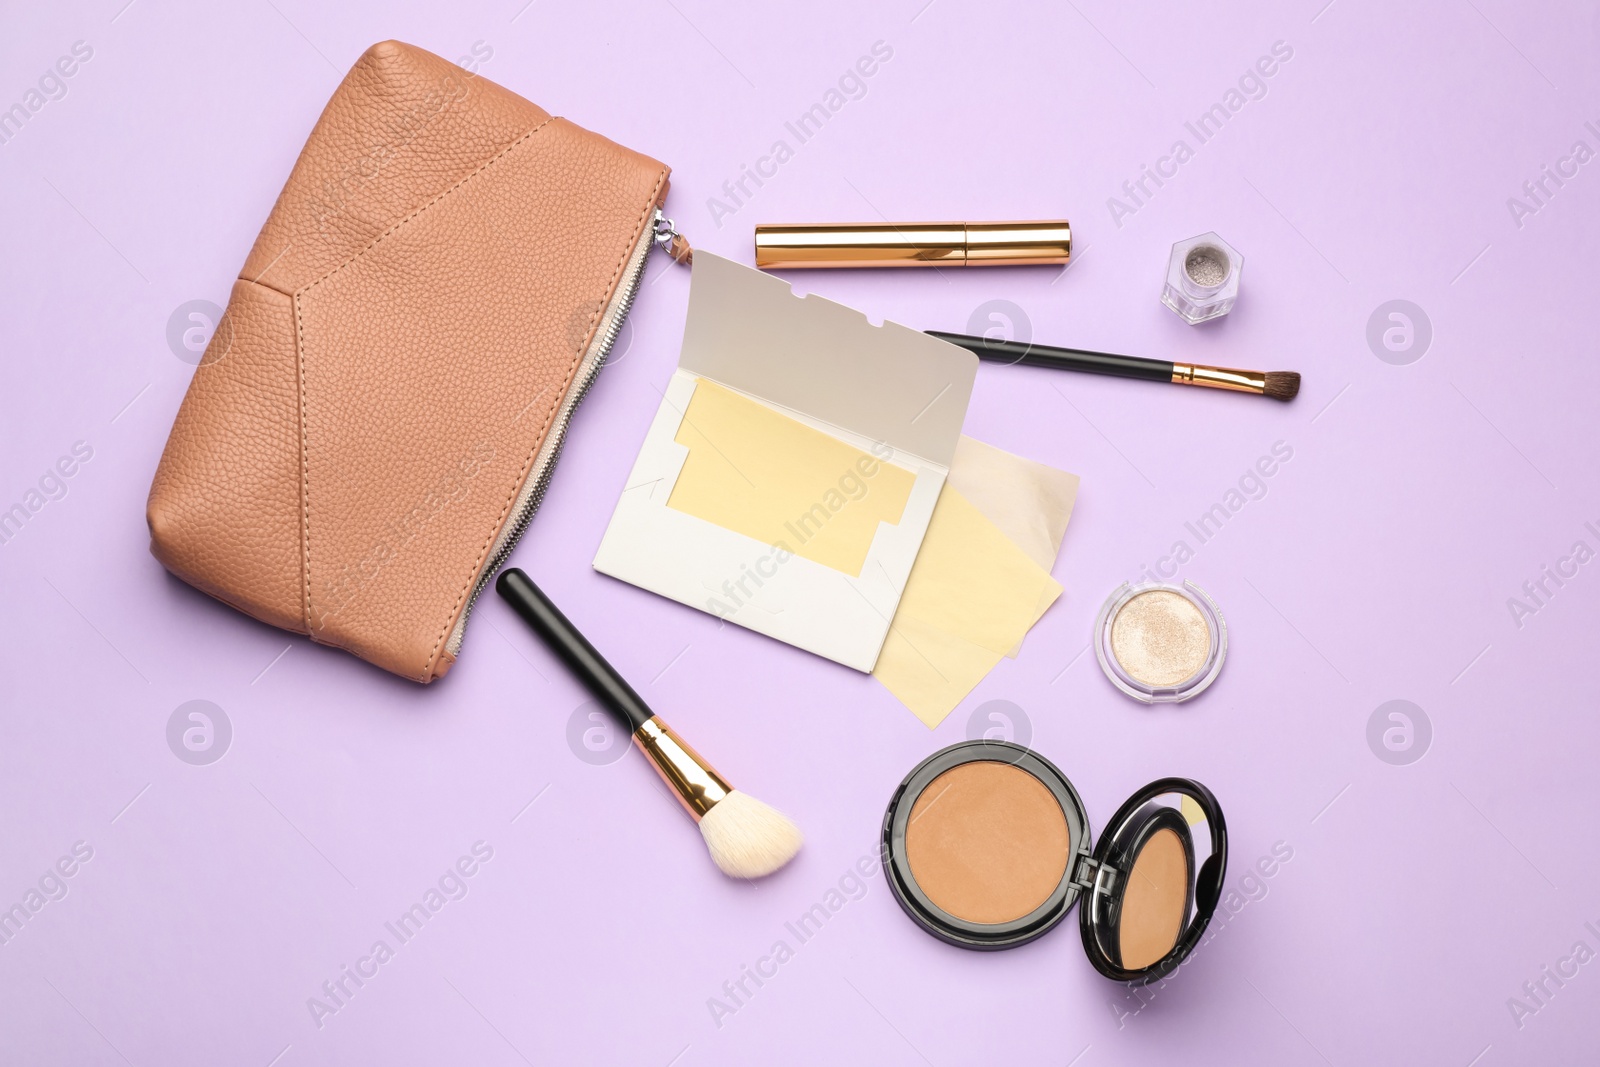 Photo of Facial oil blotting tissues and different decorative cosmetics on violet background, flat lay. Mattifying wipes